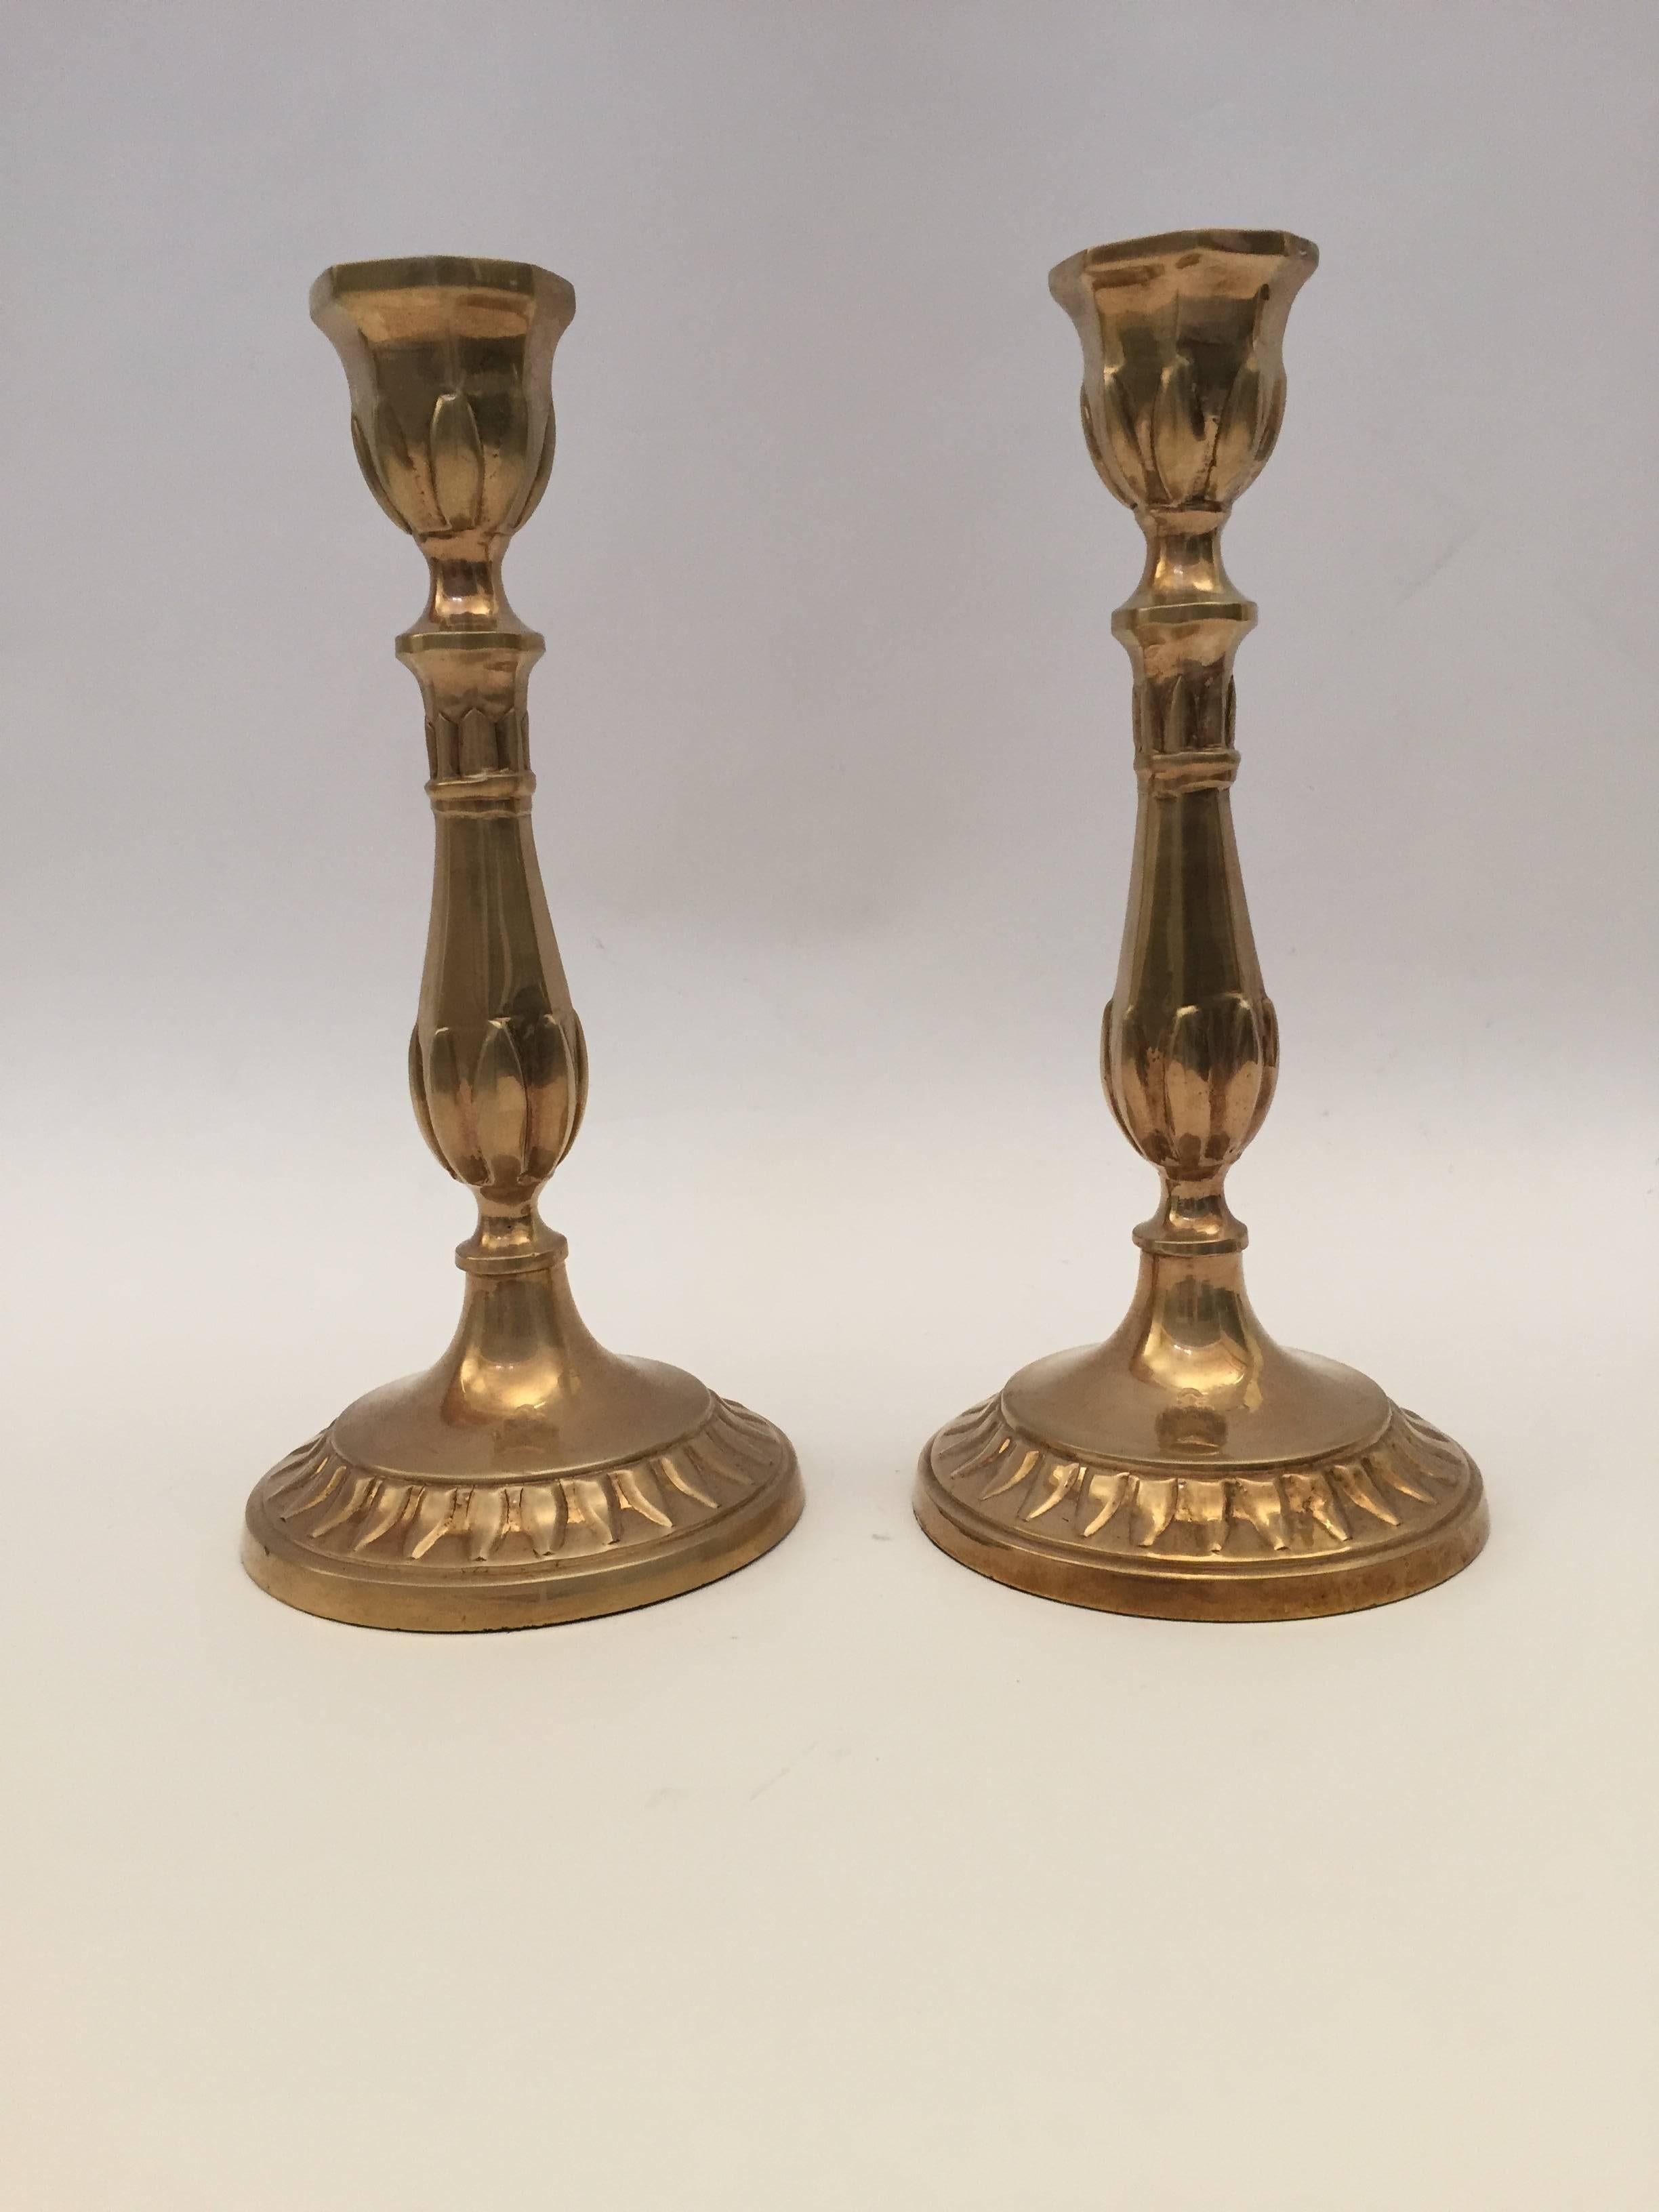 A pair of Victorian candlesticks in great patinated brass.
Engraved brass with round base.
Great brass decorative art objects.
Victorian brass candleholders, candlesticks.